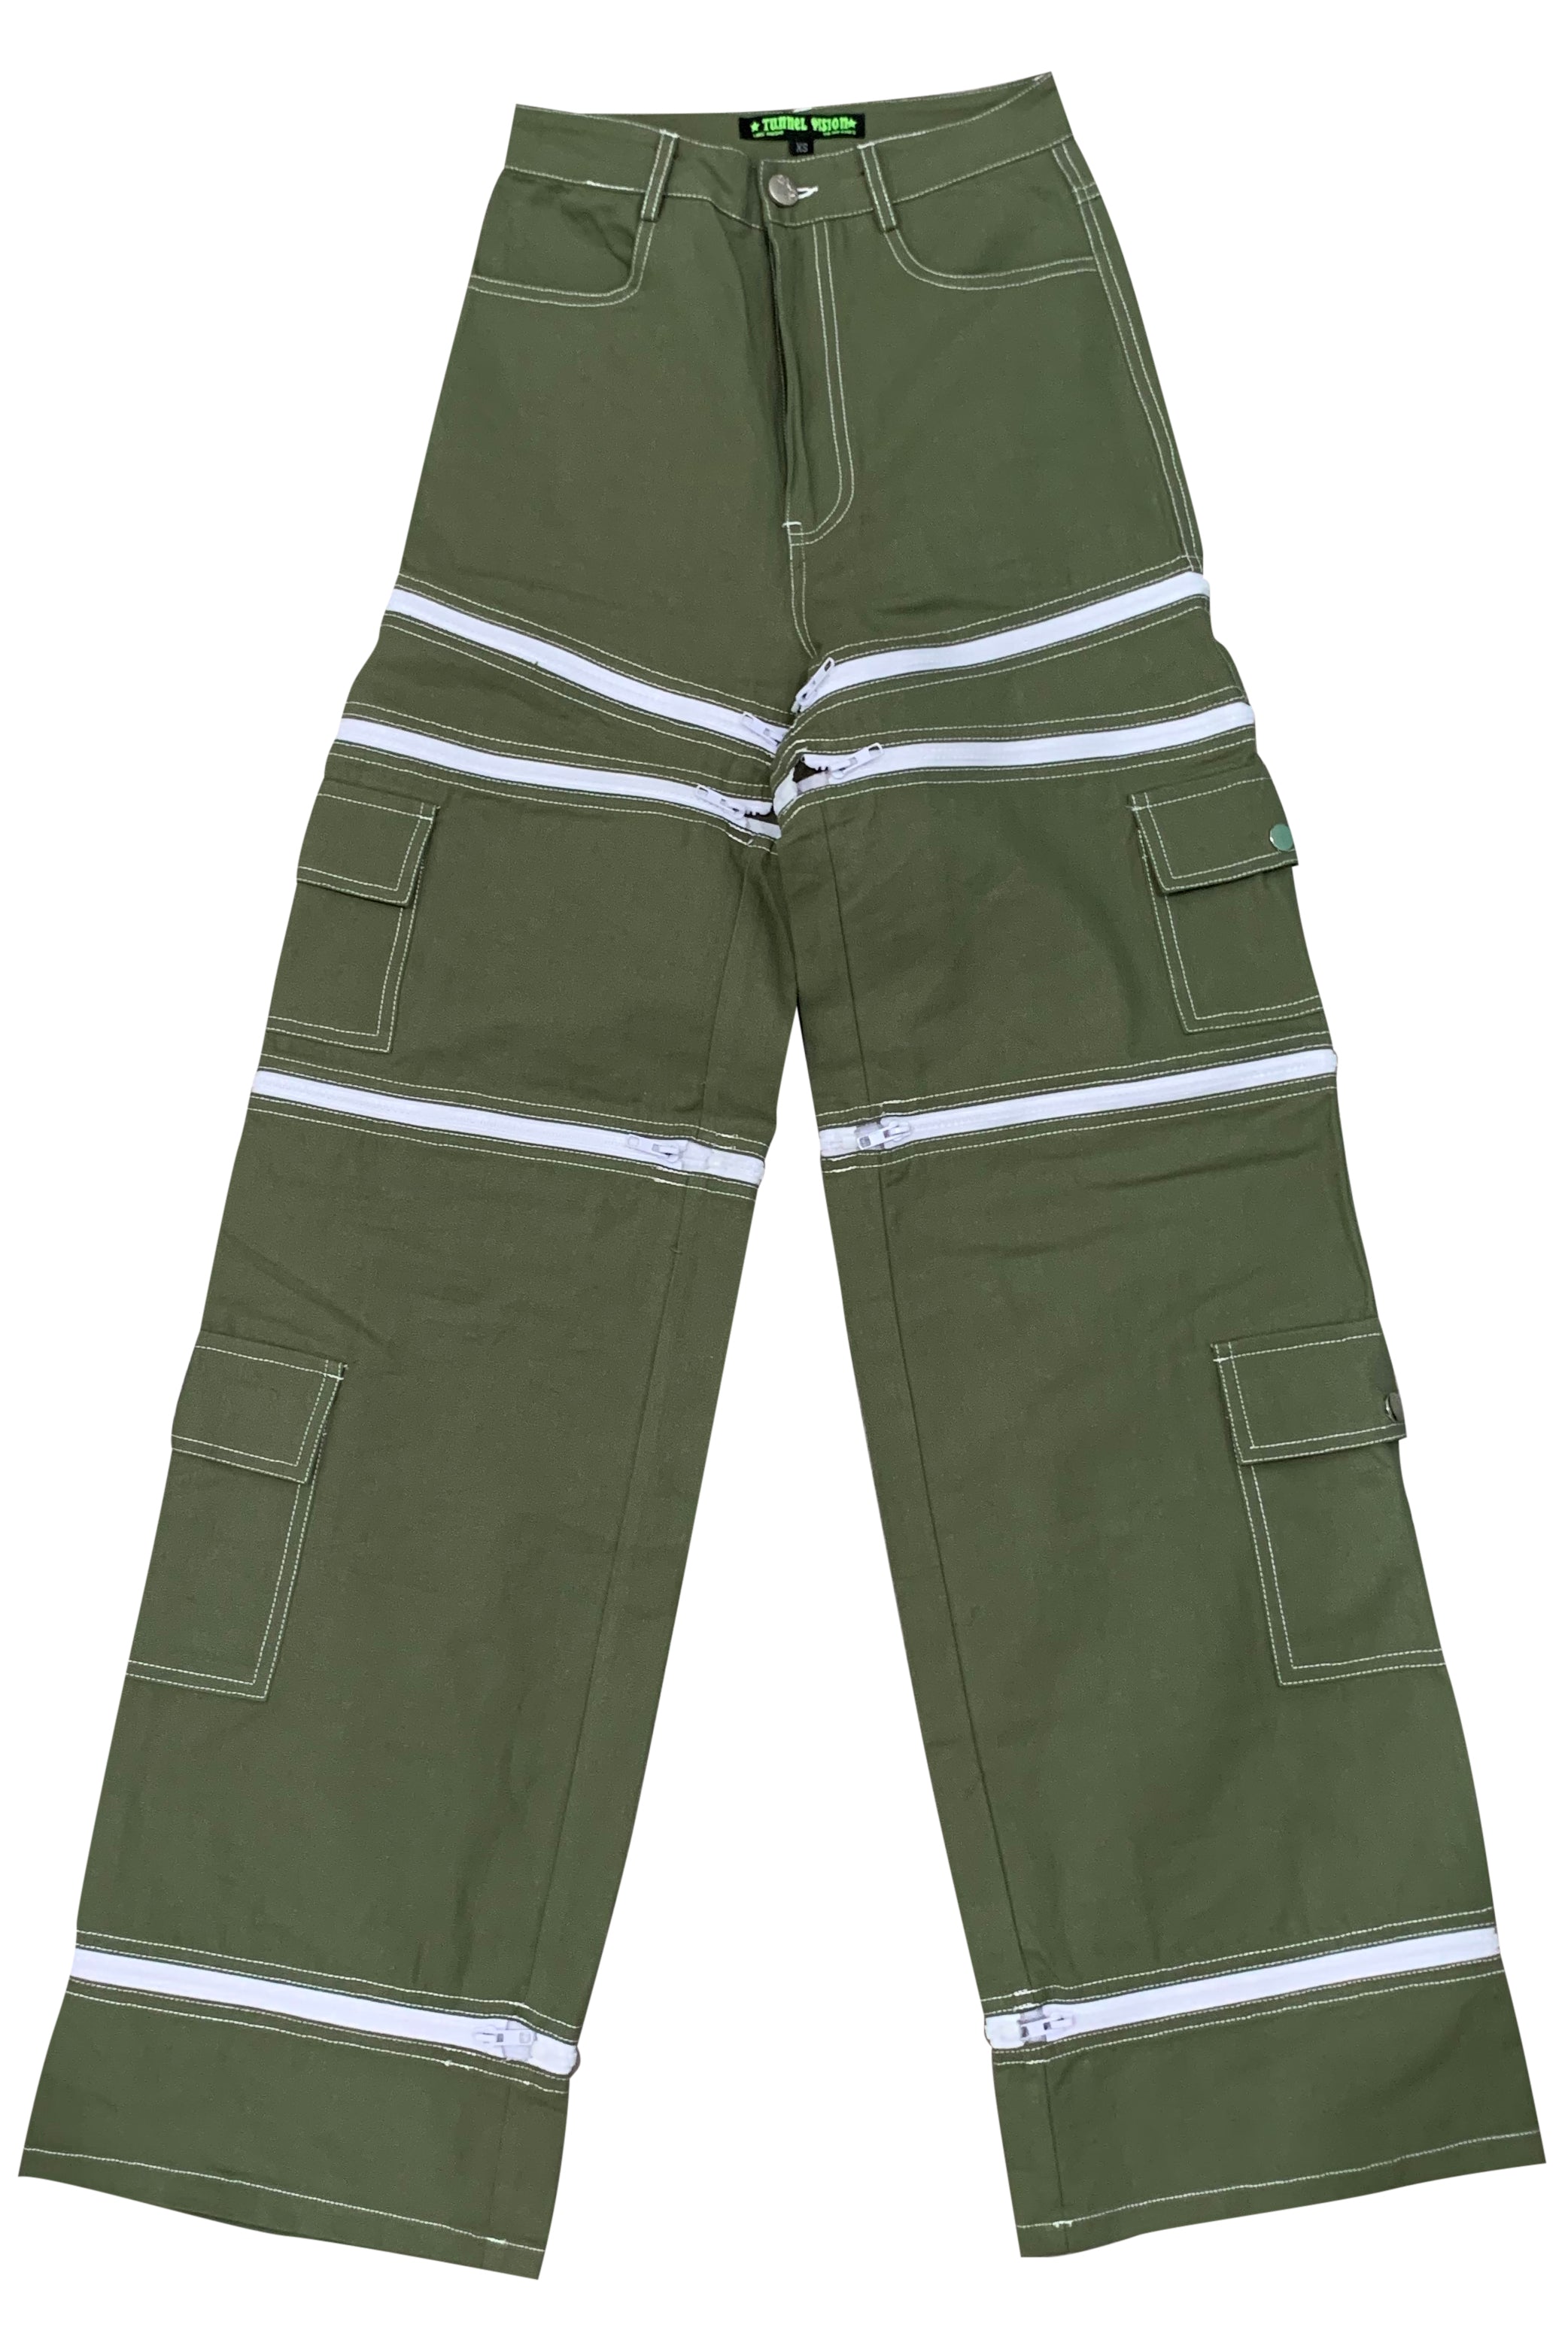 Men's Outdoor Quick Dry Convertible Lightweight Hiking Fishing Zip Off Cargo  Work Pants Trousers Army Green 38